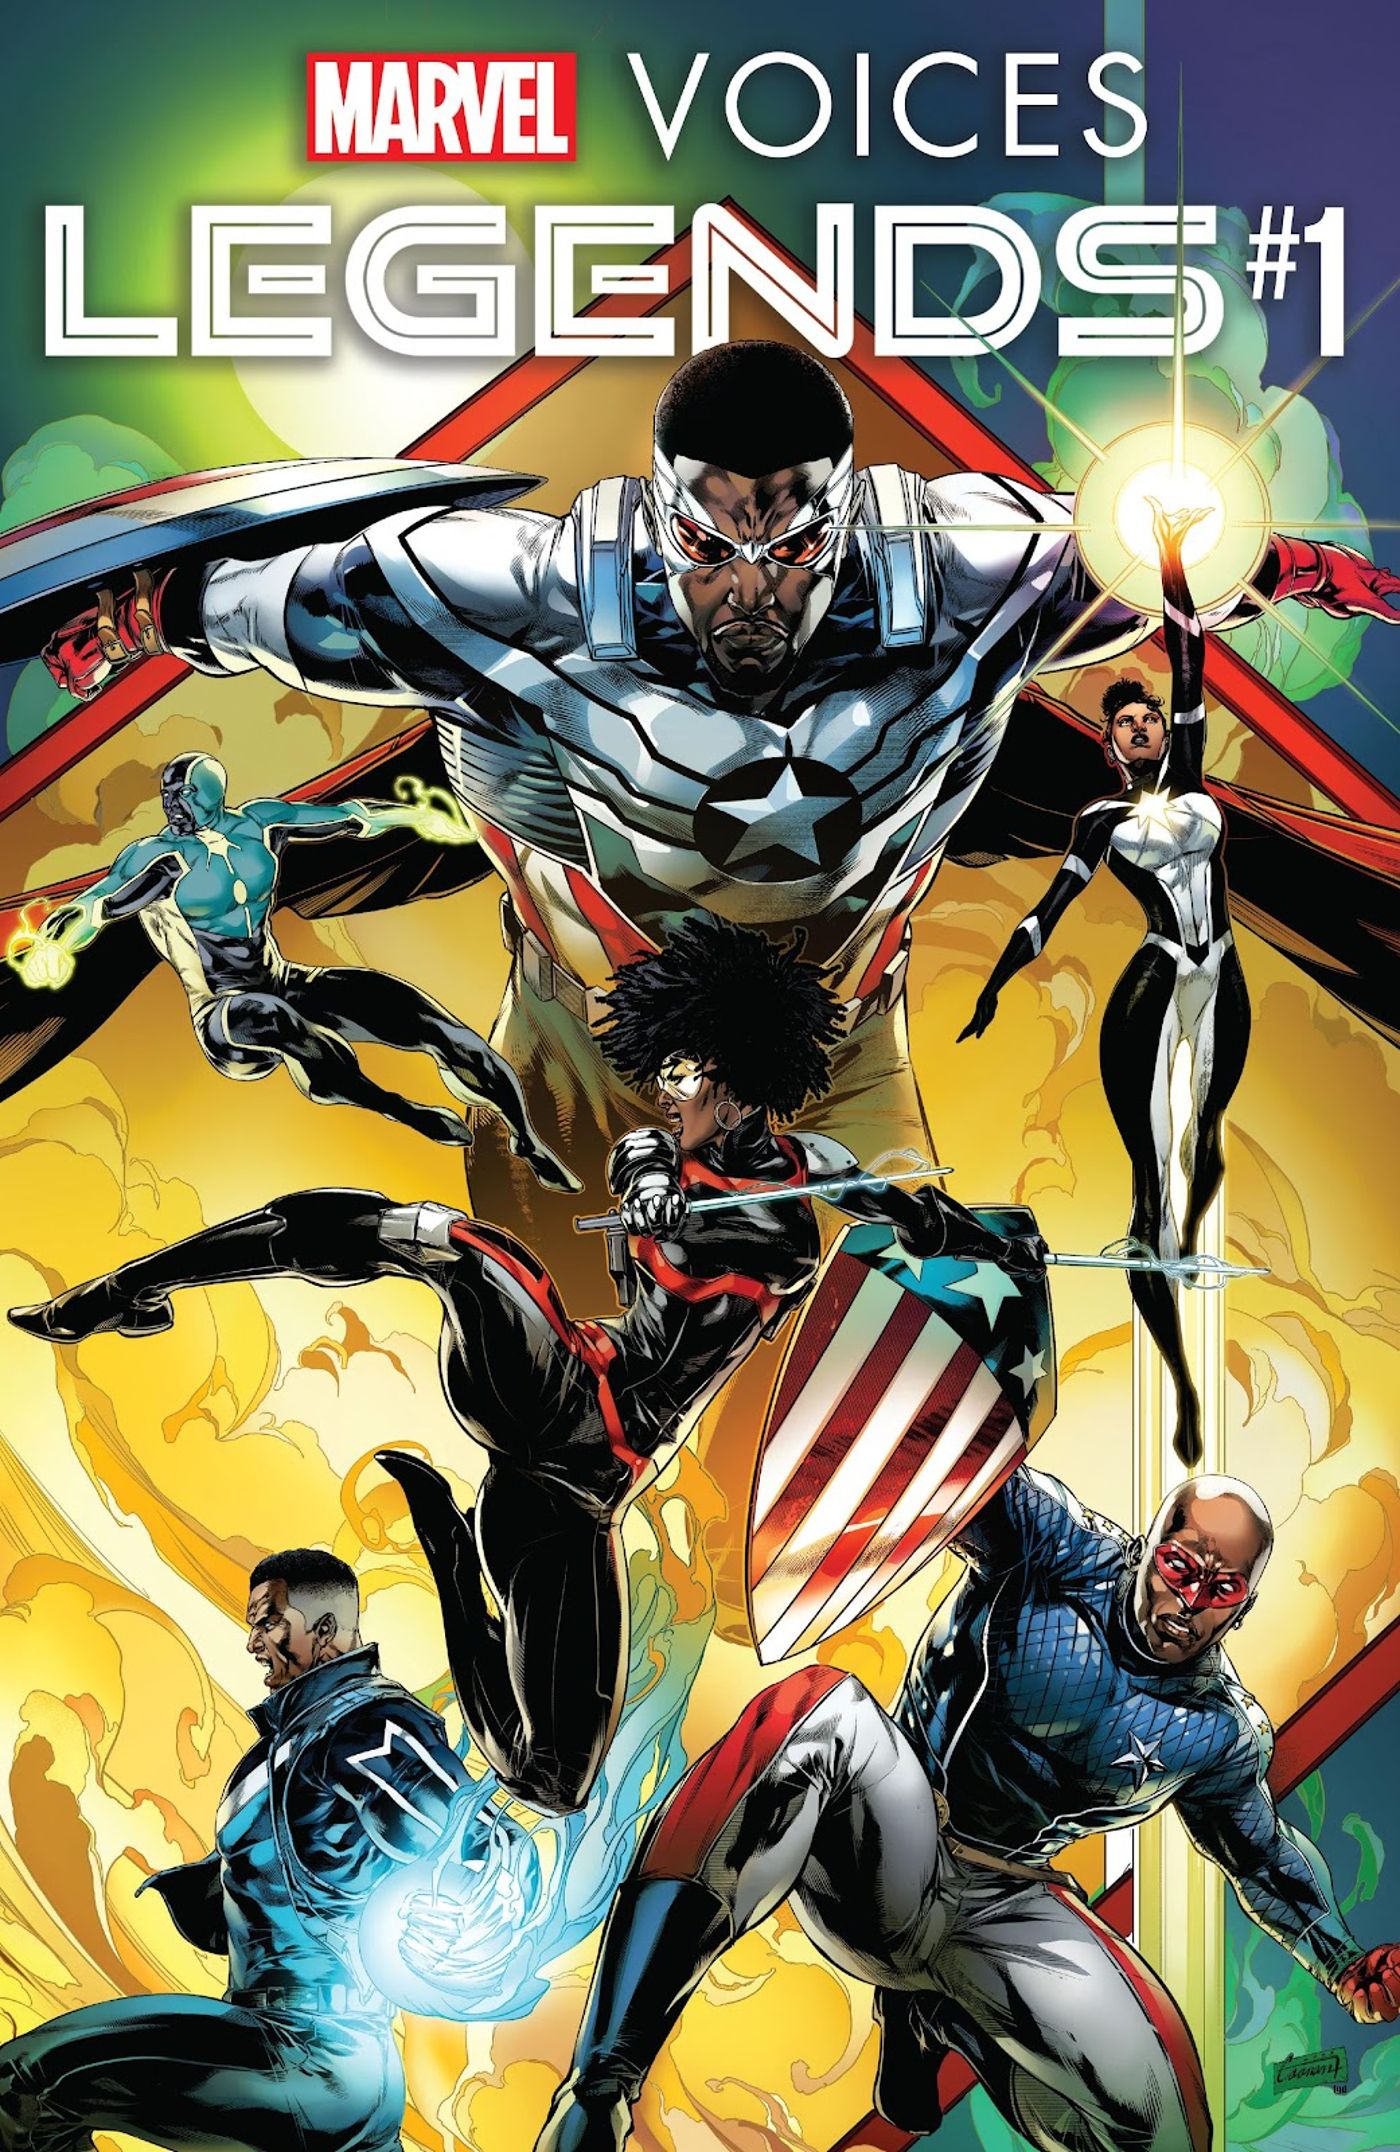 Marvel's Voices Legends Cover featuring Sam Wilson as Captain America, Eli Bradley as Patriot, and other black heroes. 